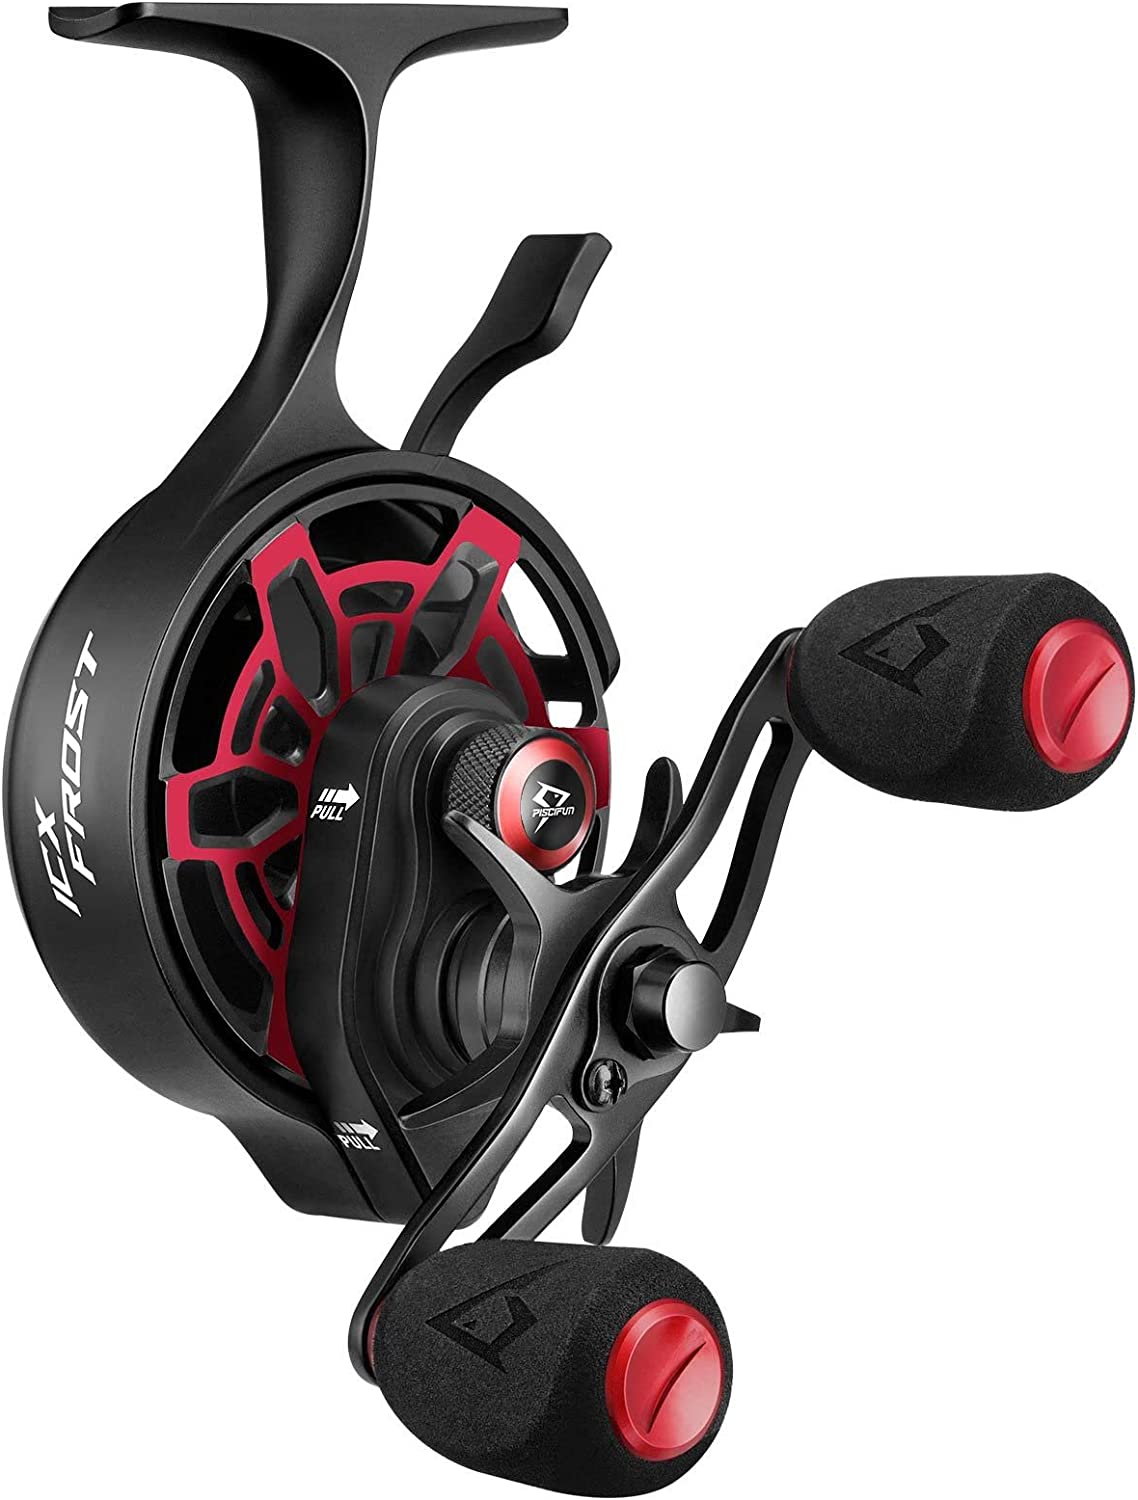 Left Handed Ice Fishing Reel with 3 5 1 Speed Ratio and Magnetic